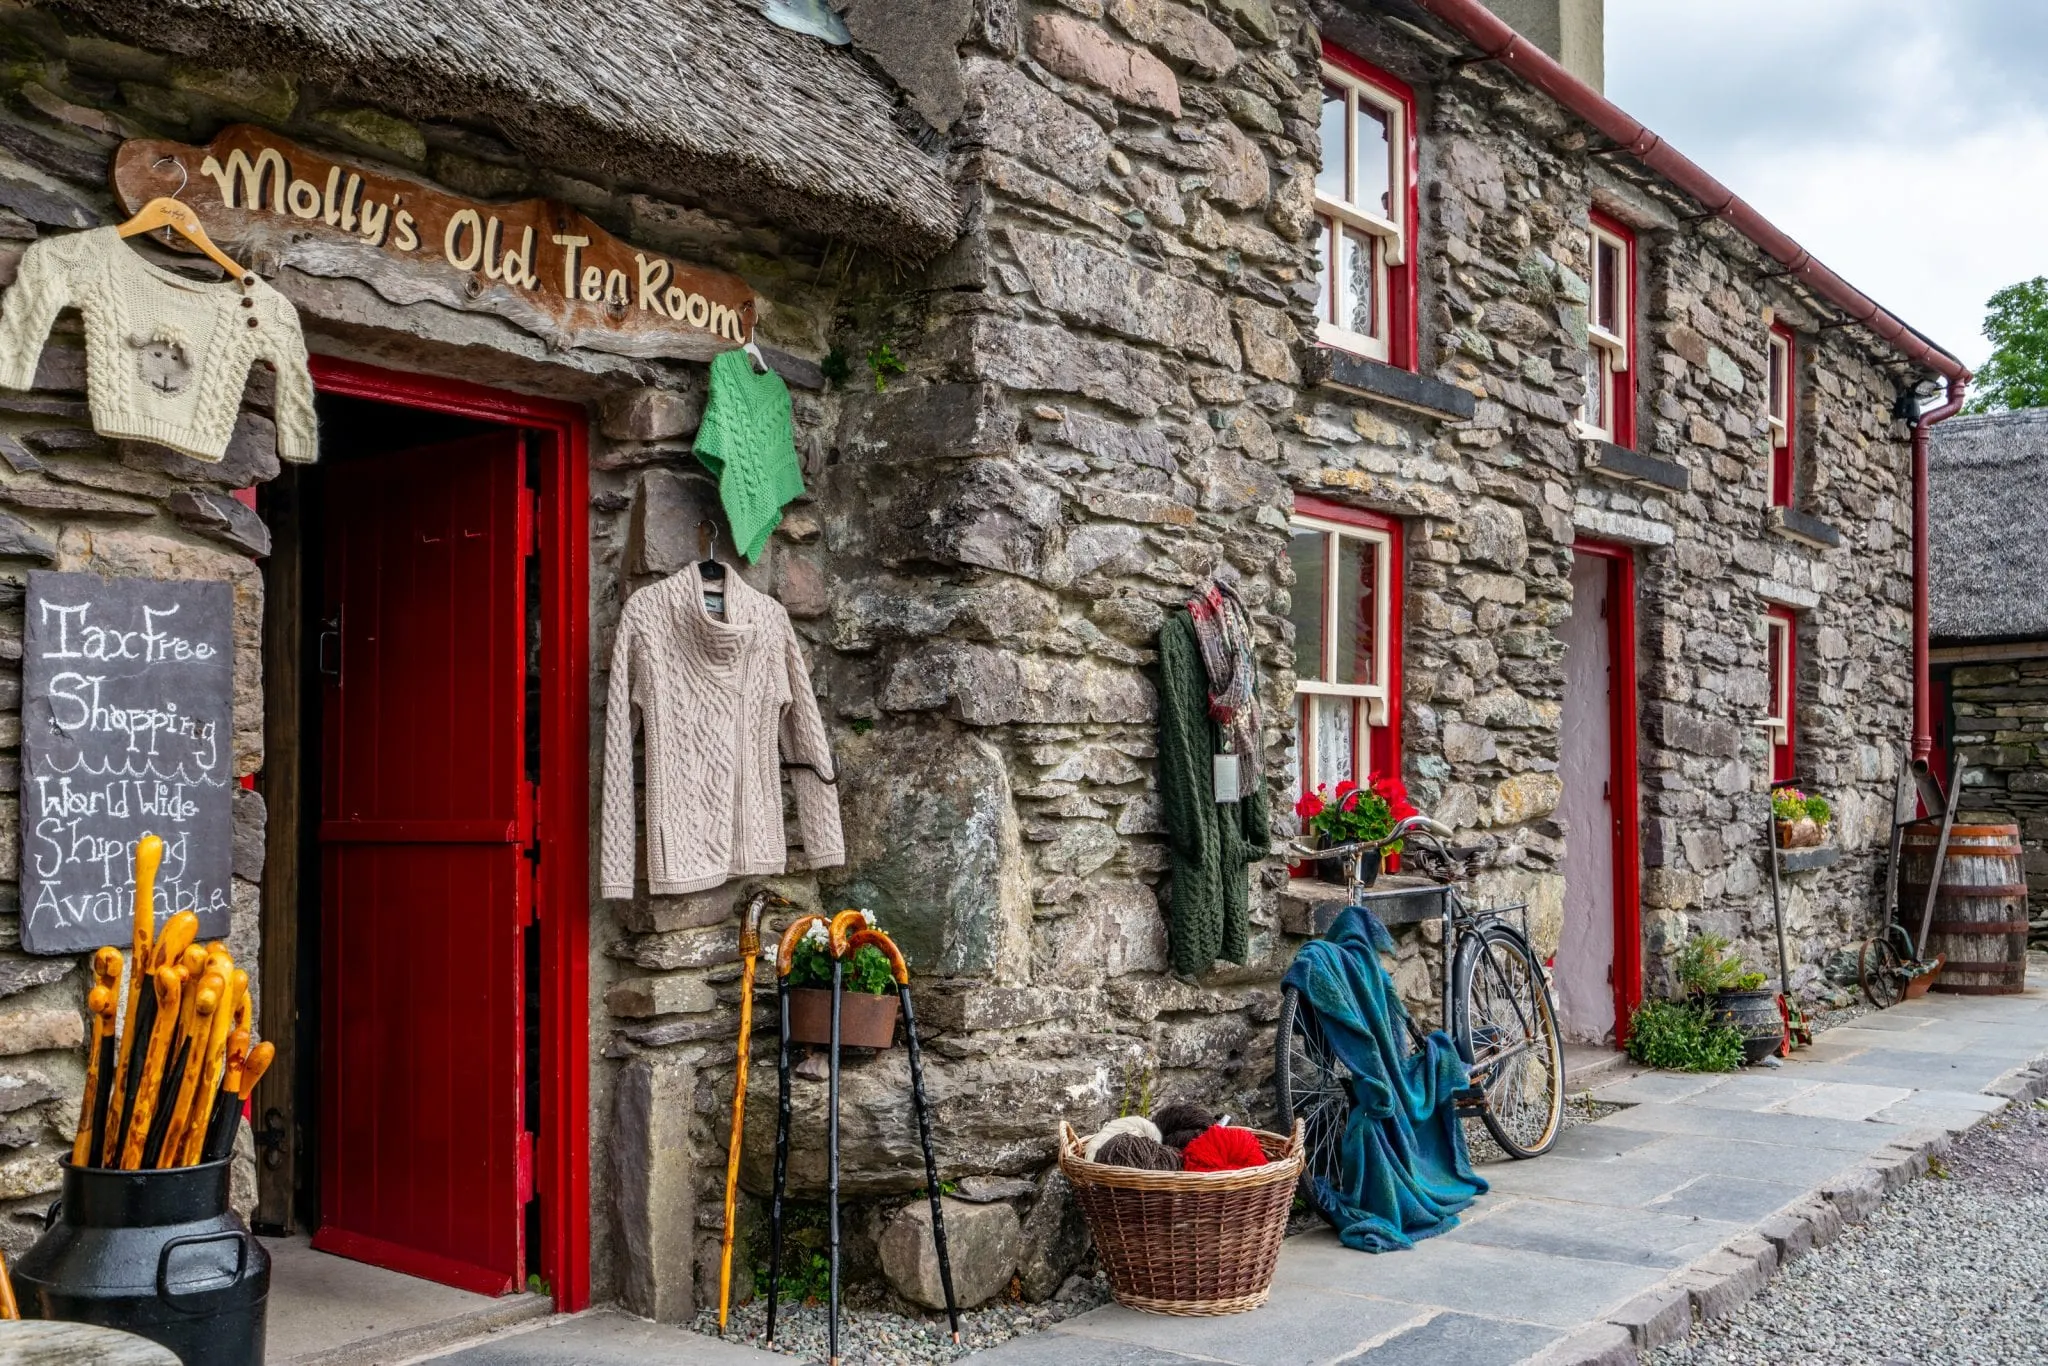 Souvenir shop in Ireland selling wool sweaters. The building is stone and red. If you want to buy wool in Ireland, don't overpack when deciding what to bring to Ireland.